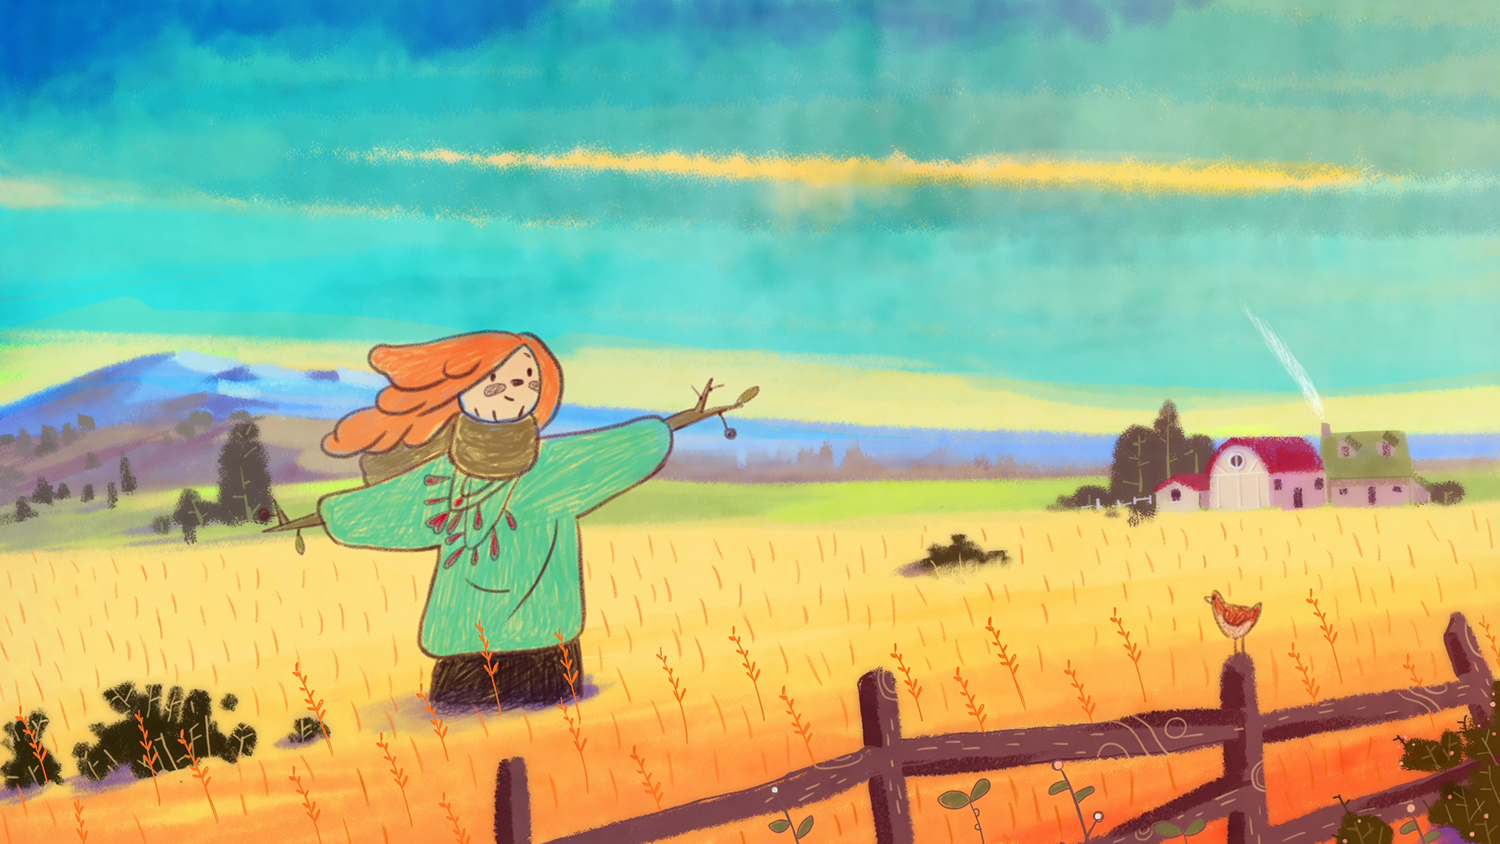 Animated scarecrow stands in a field